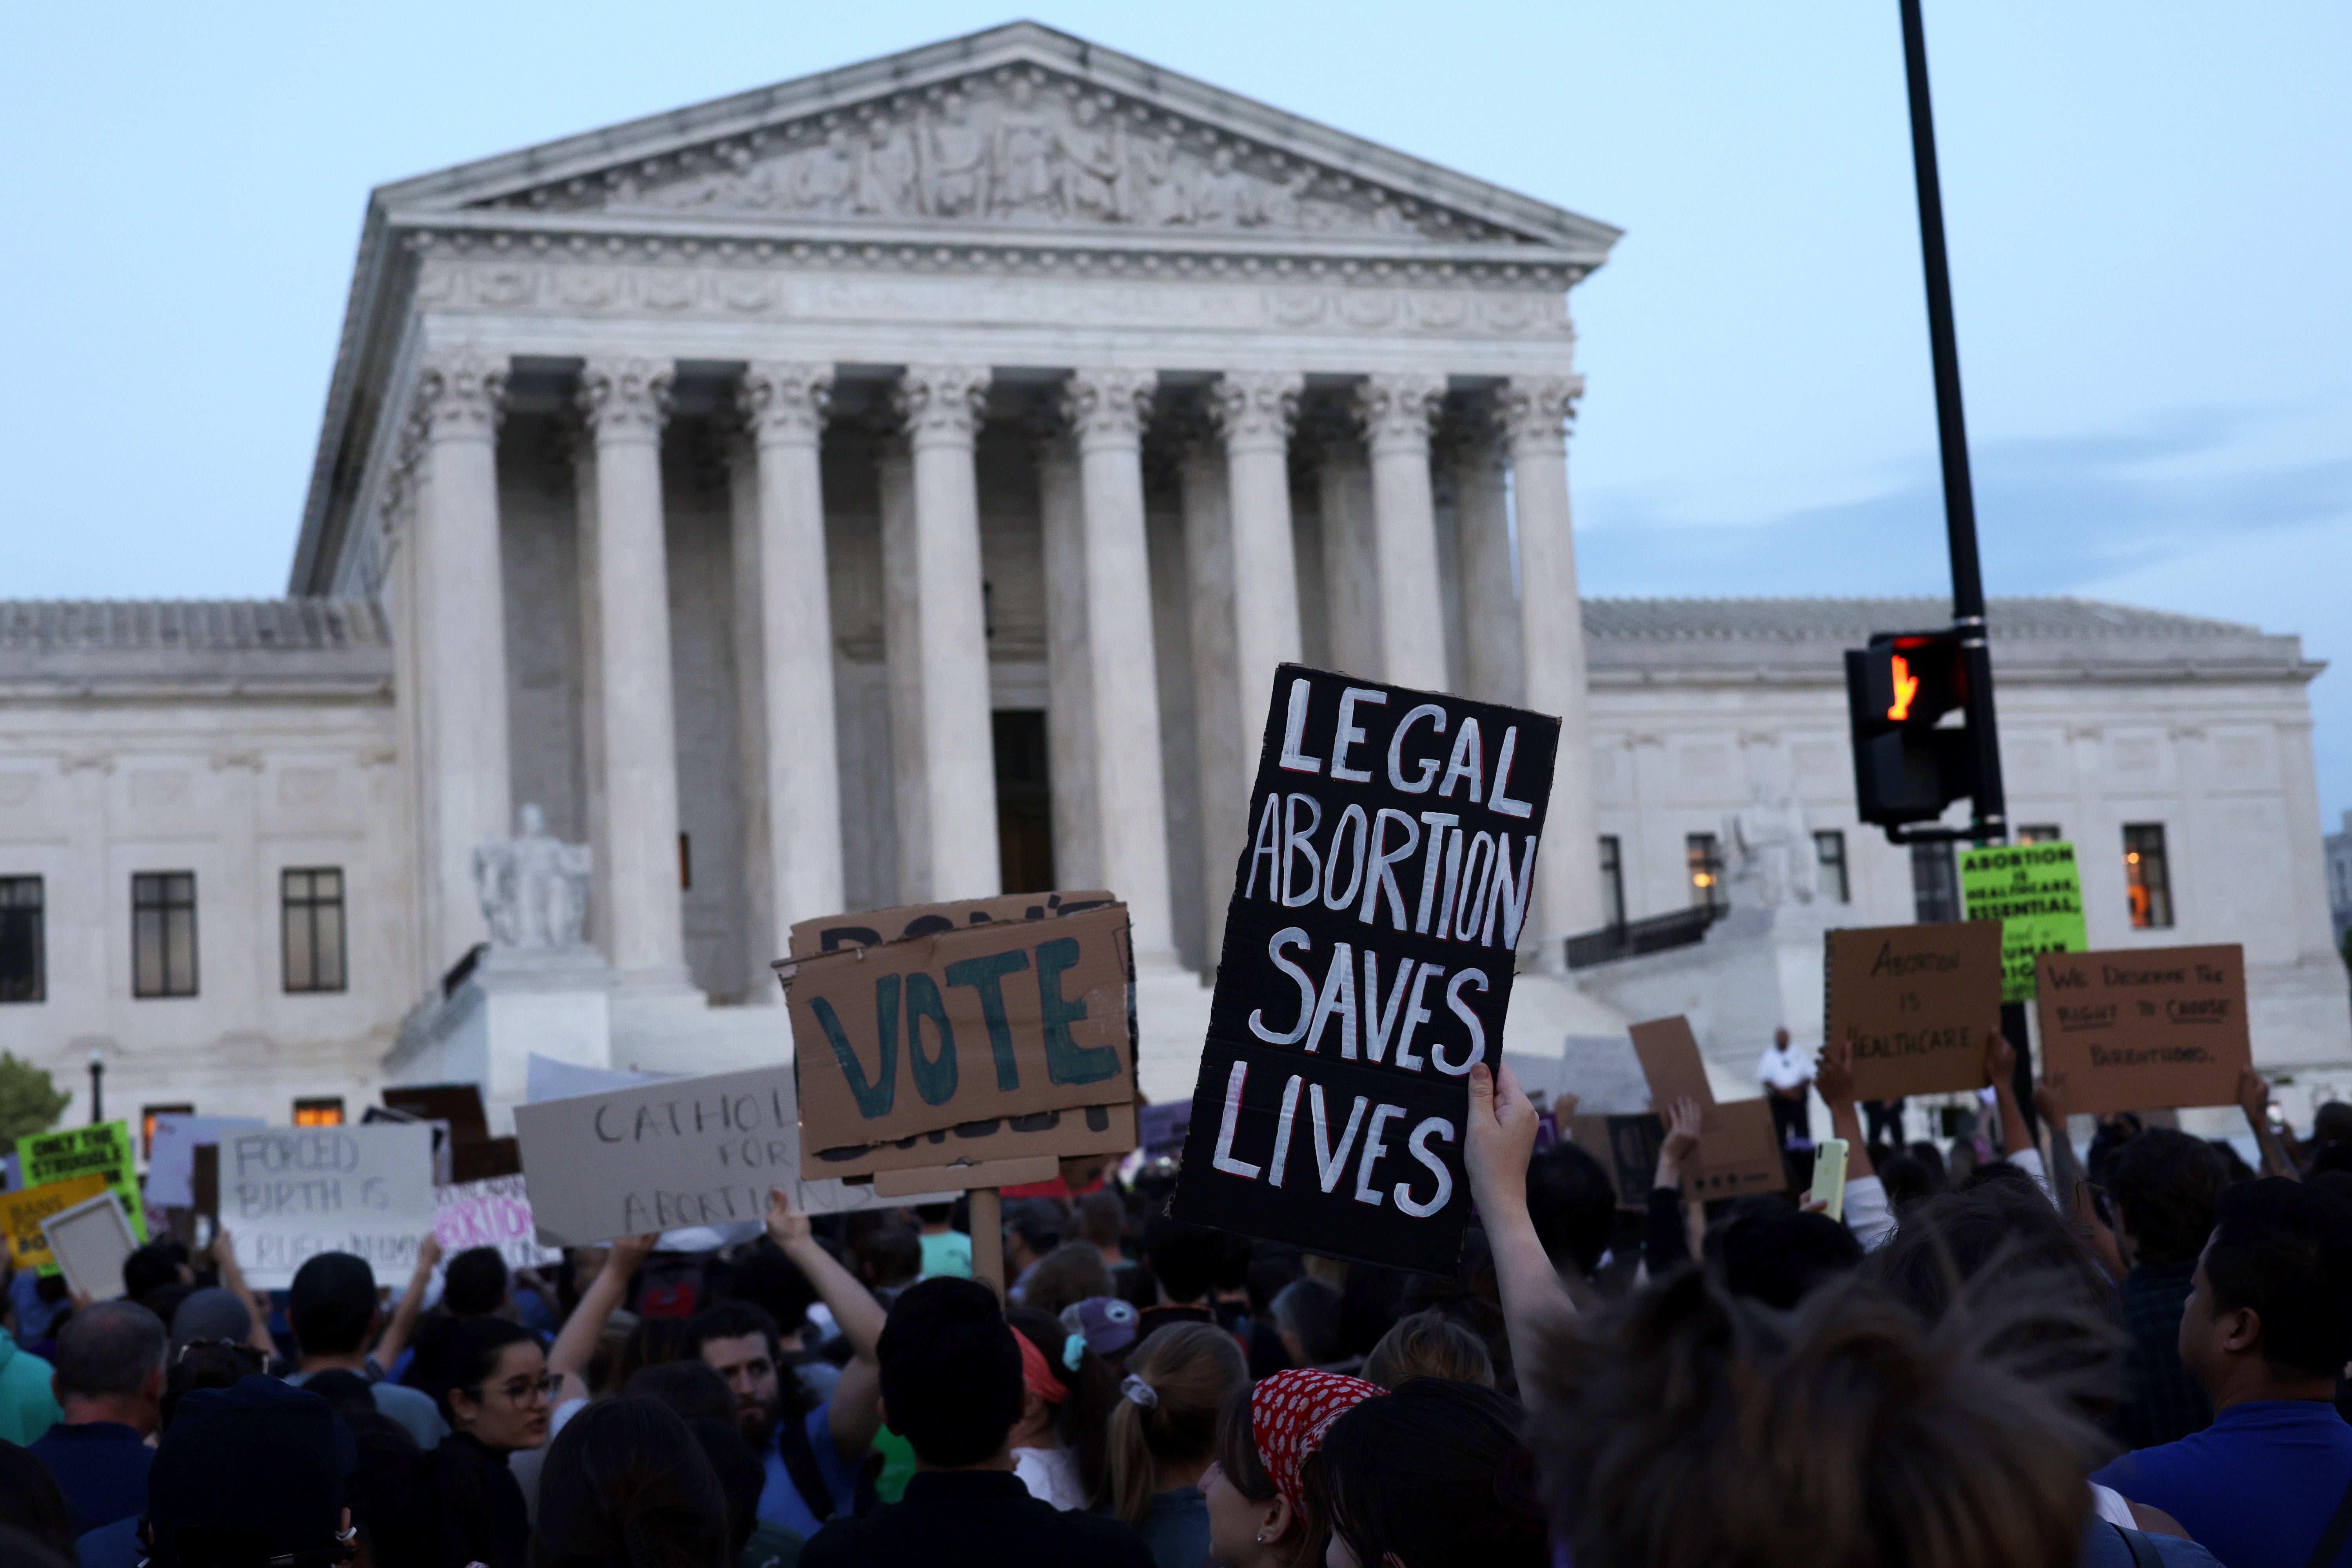 Pro-choice activists protest at the Supreme Court after the Roe v Wade ruling leak